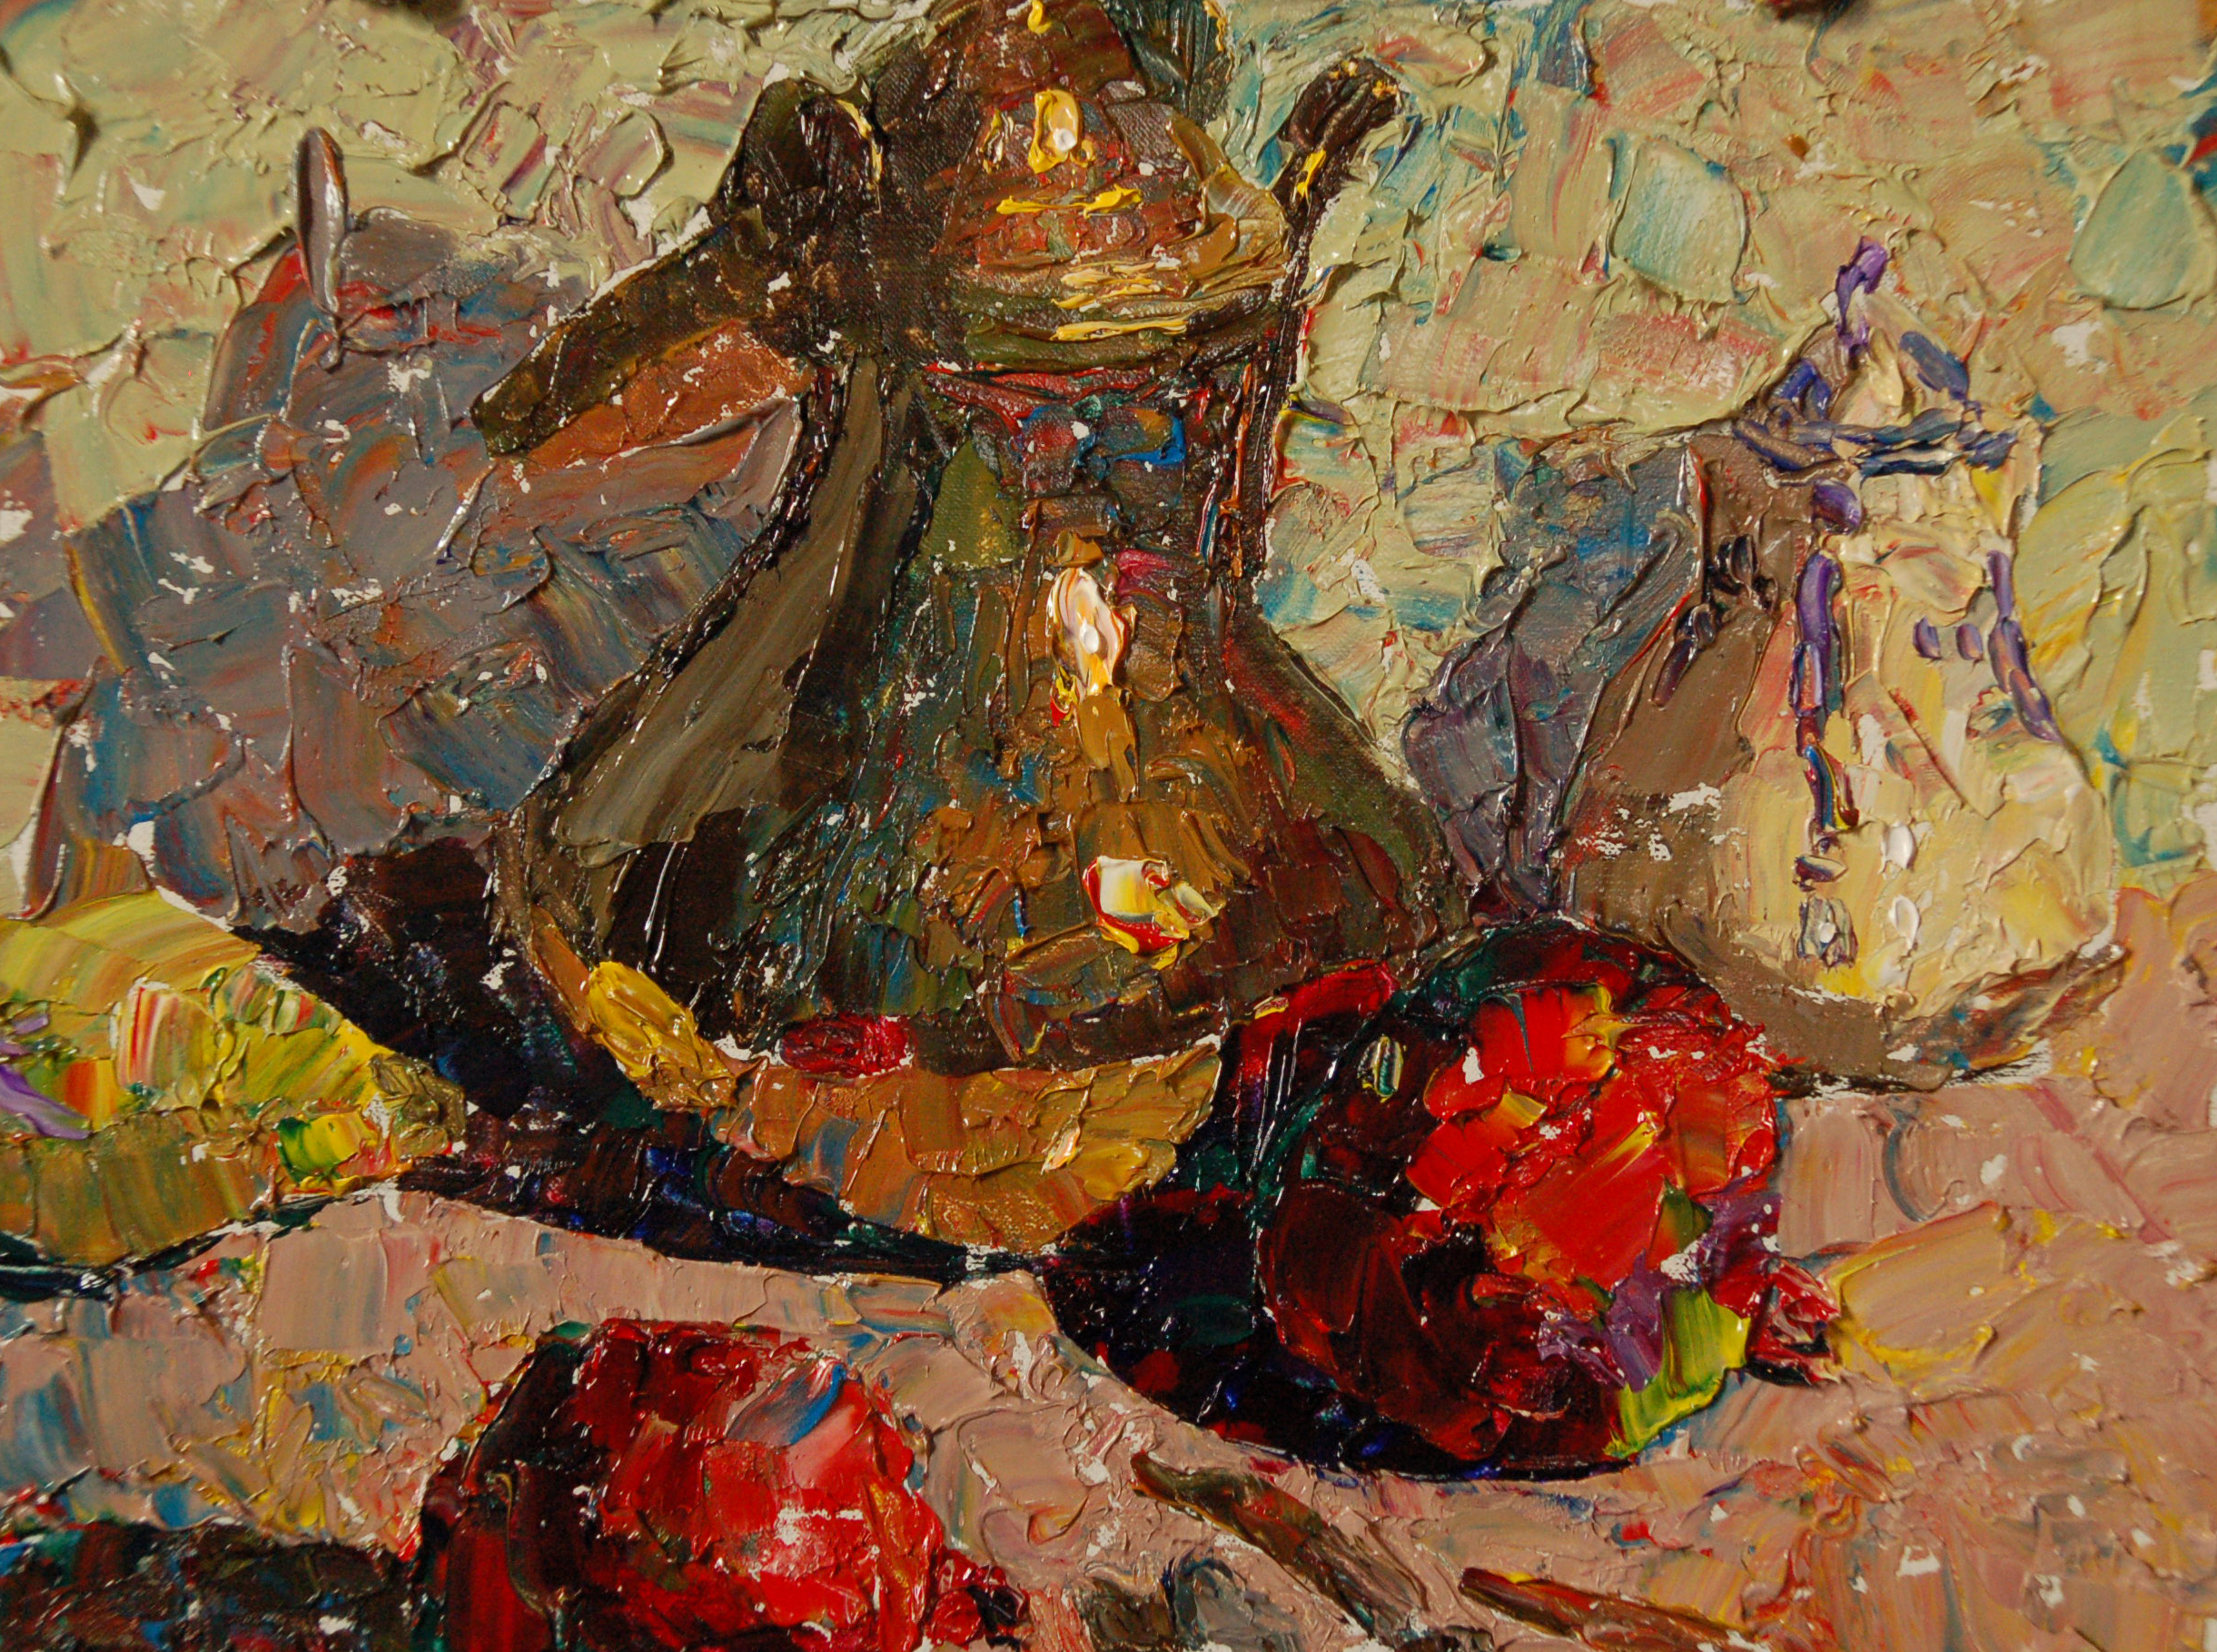 Still life painting with teapot and fruit